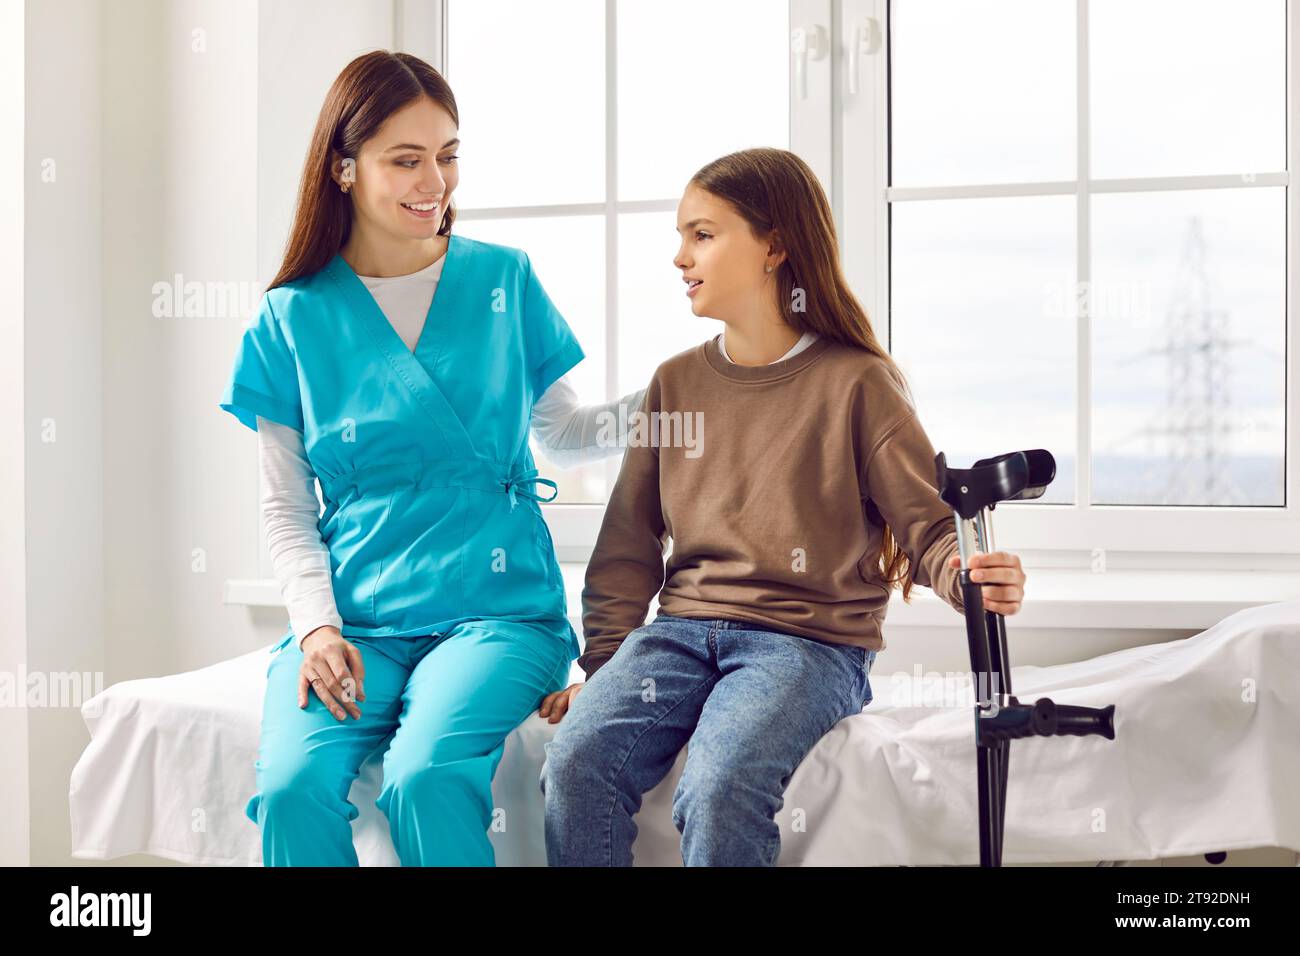 Young friendly nurse talking with a child girl patient sitting on the couch in clinic with crutches Stock Photo